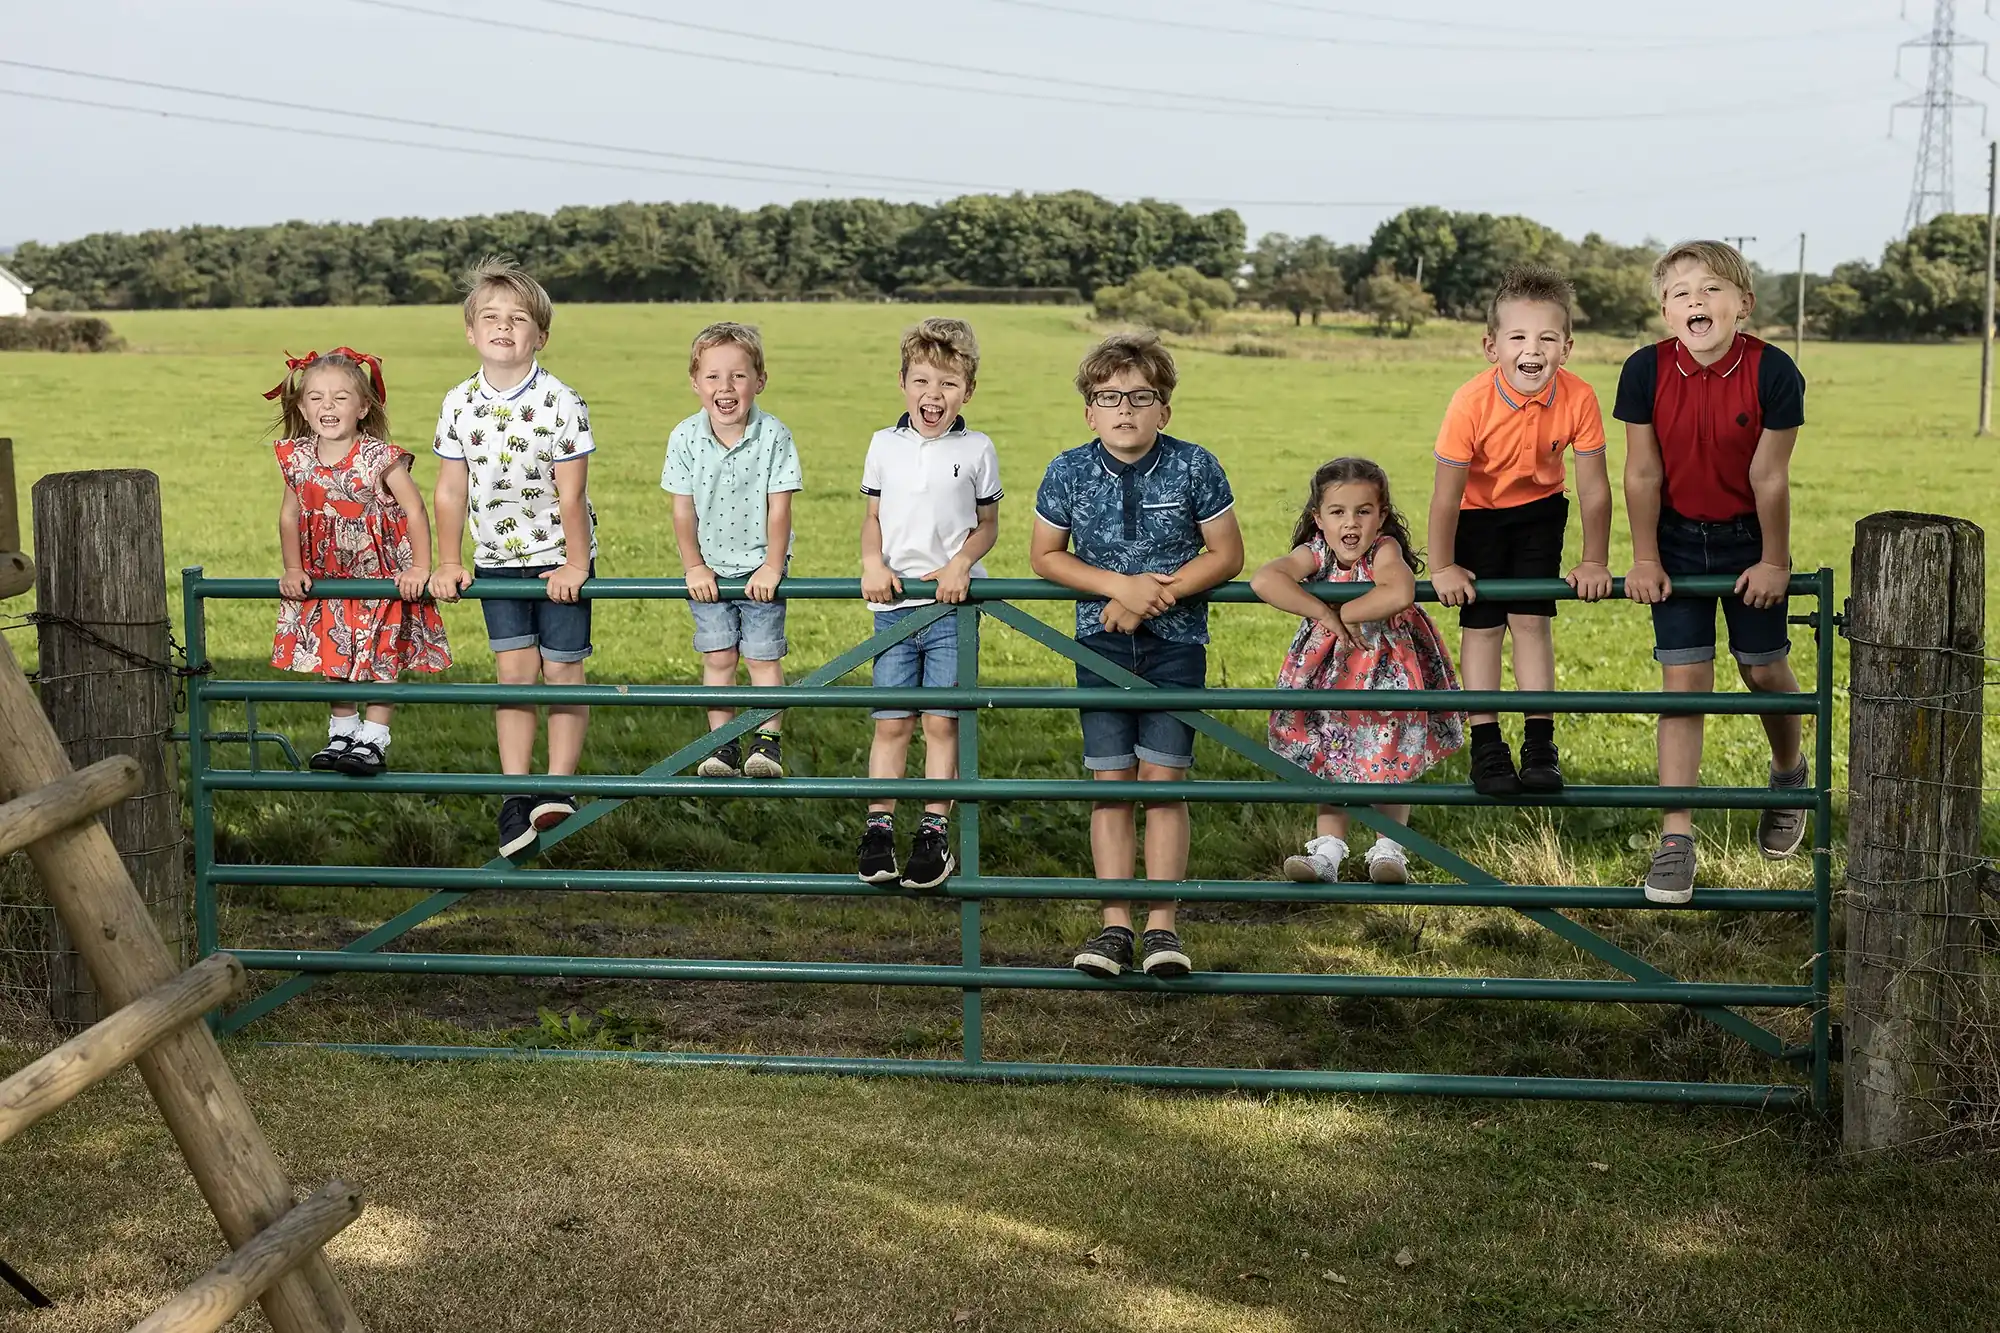 Seven children sitting on a metal gate in a green field, with trees and power lines in the background.